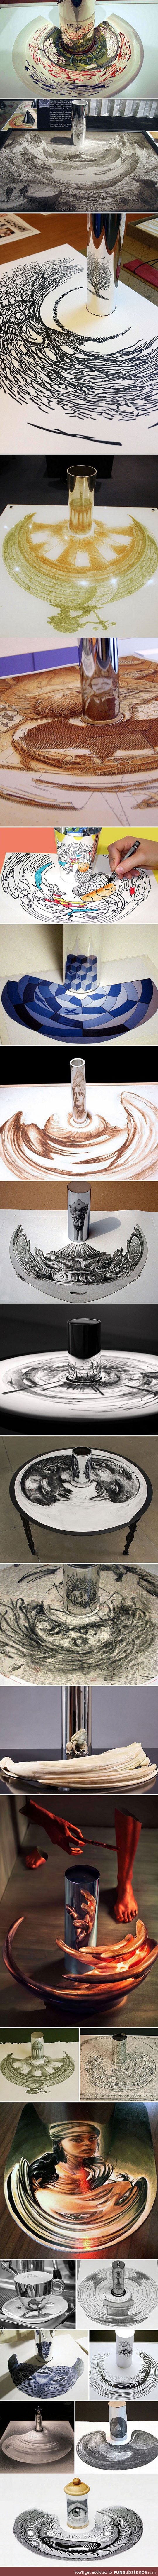 Clever anamorphic artworks